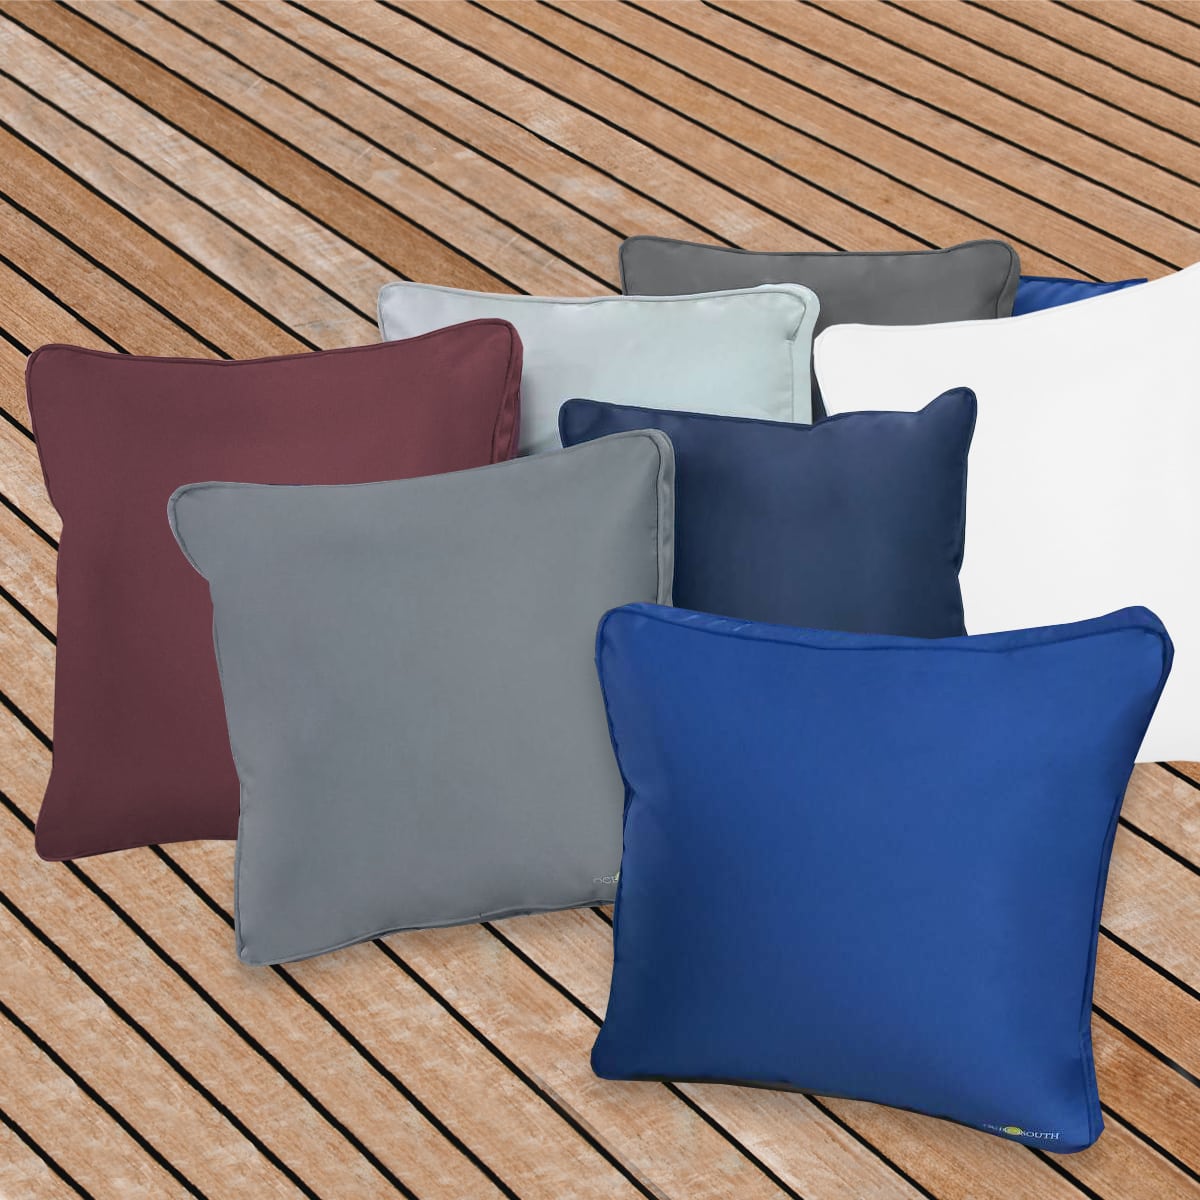 Comfortable Boat Deck Pillows for Relaxation